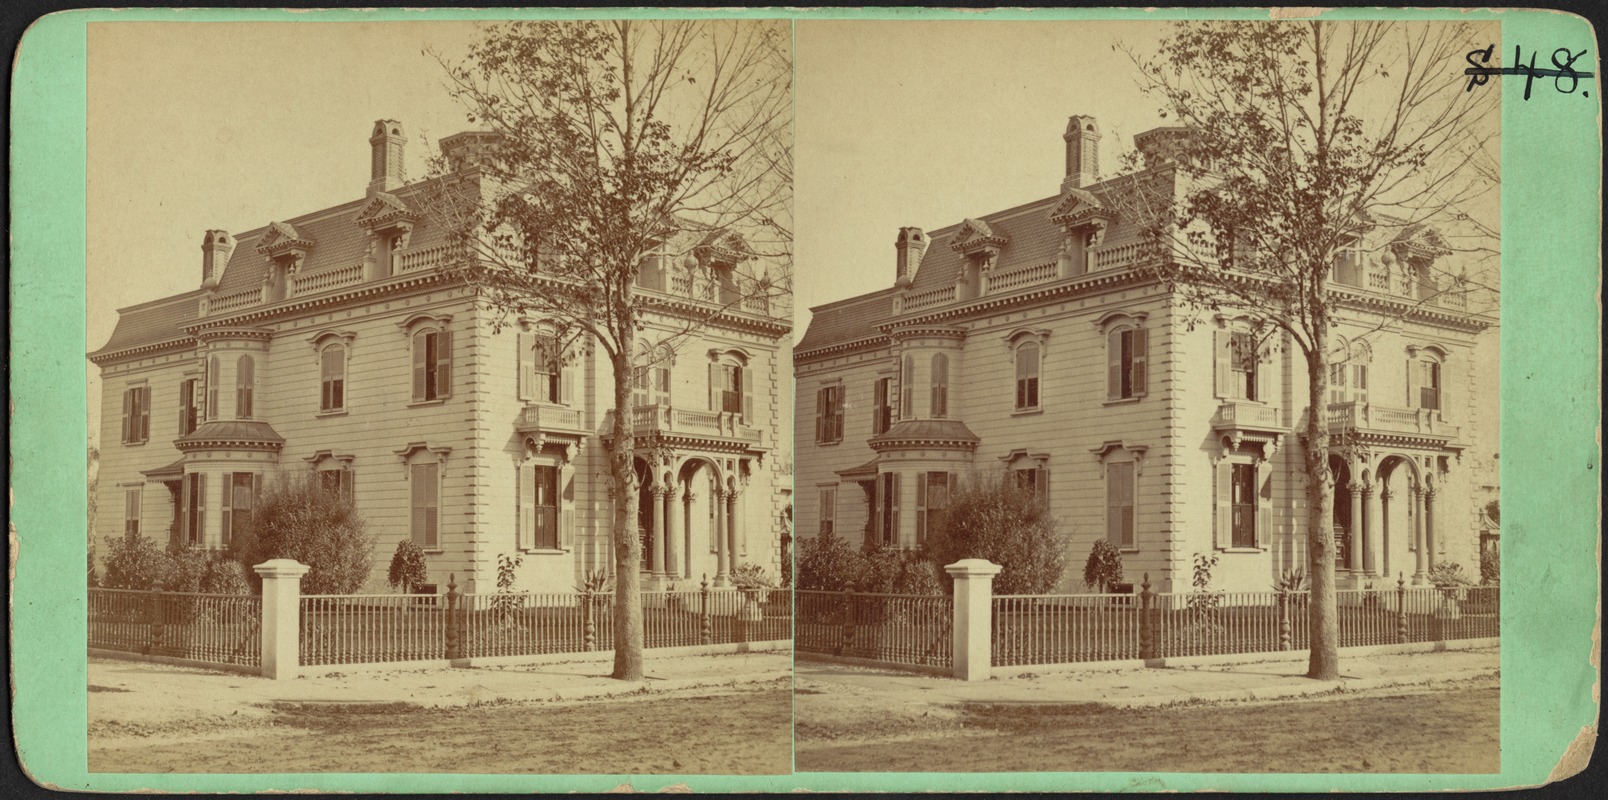 Haskell Residence, New Bedford, MA